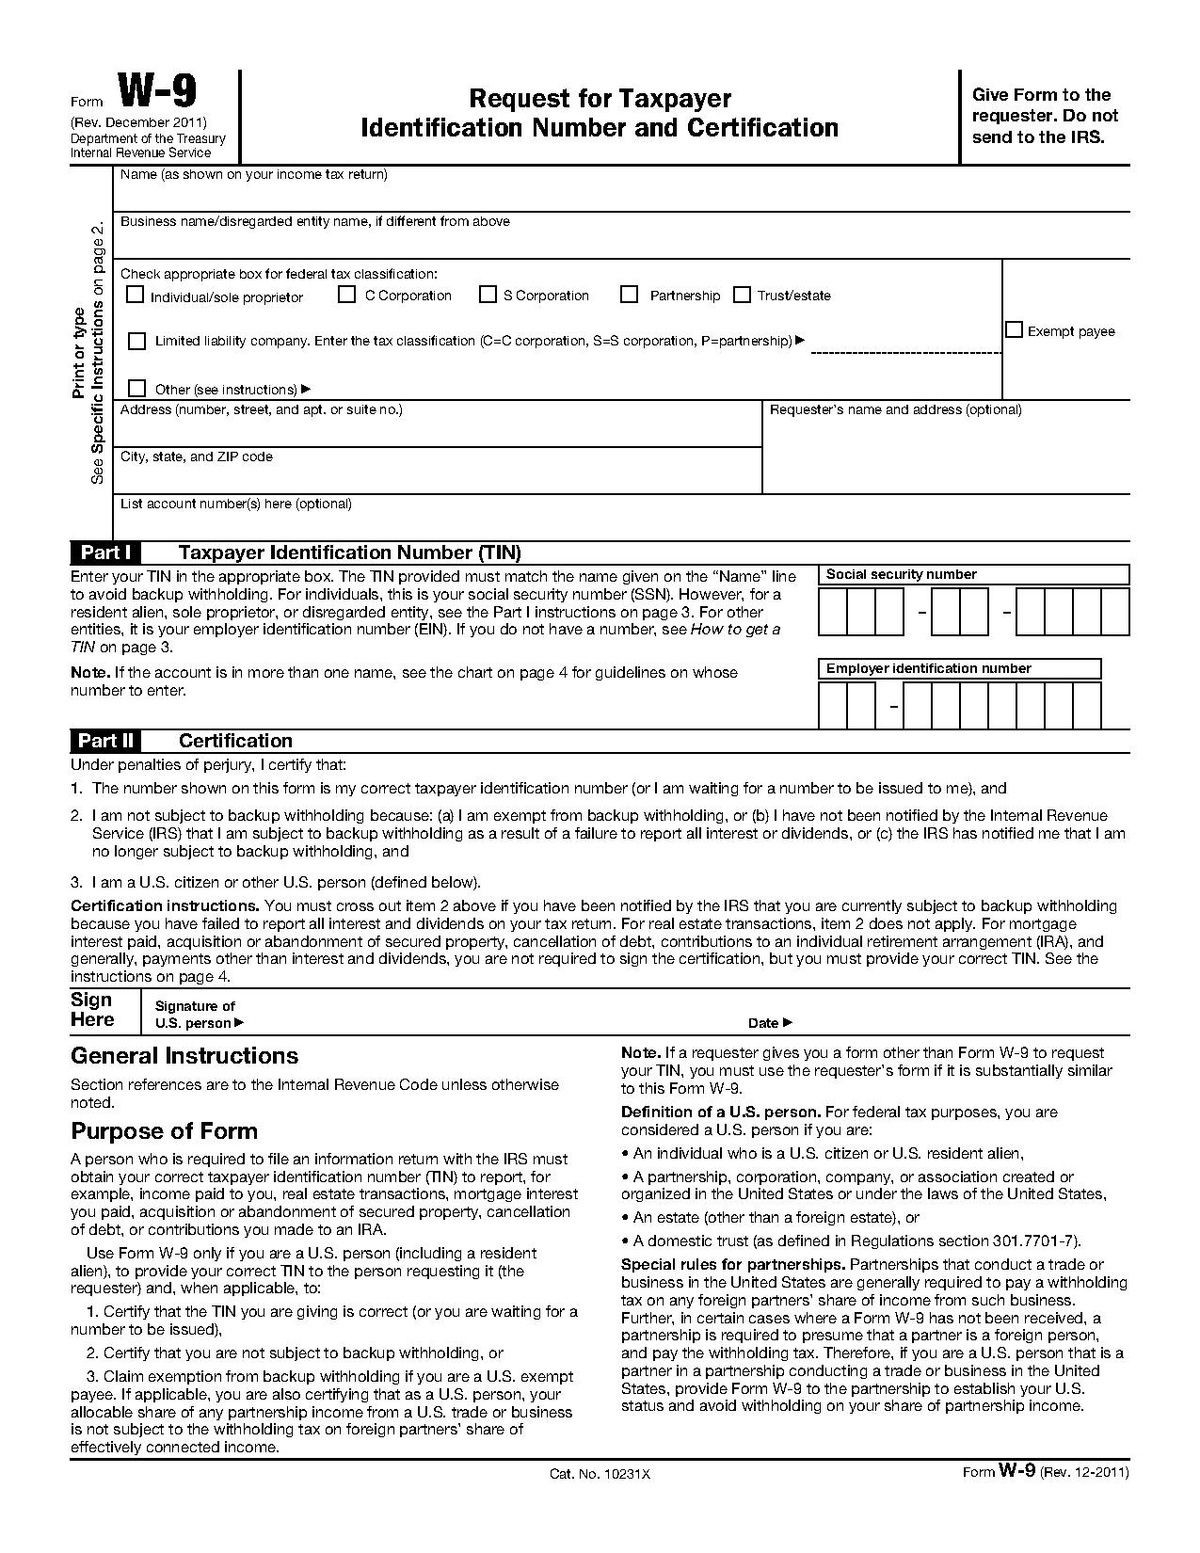 Blank W9 Tax Form | W-9 Form Printable, Fillable 2021-Blank W-9 Form 2021 Printable